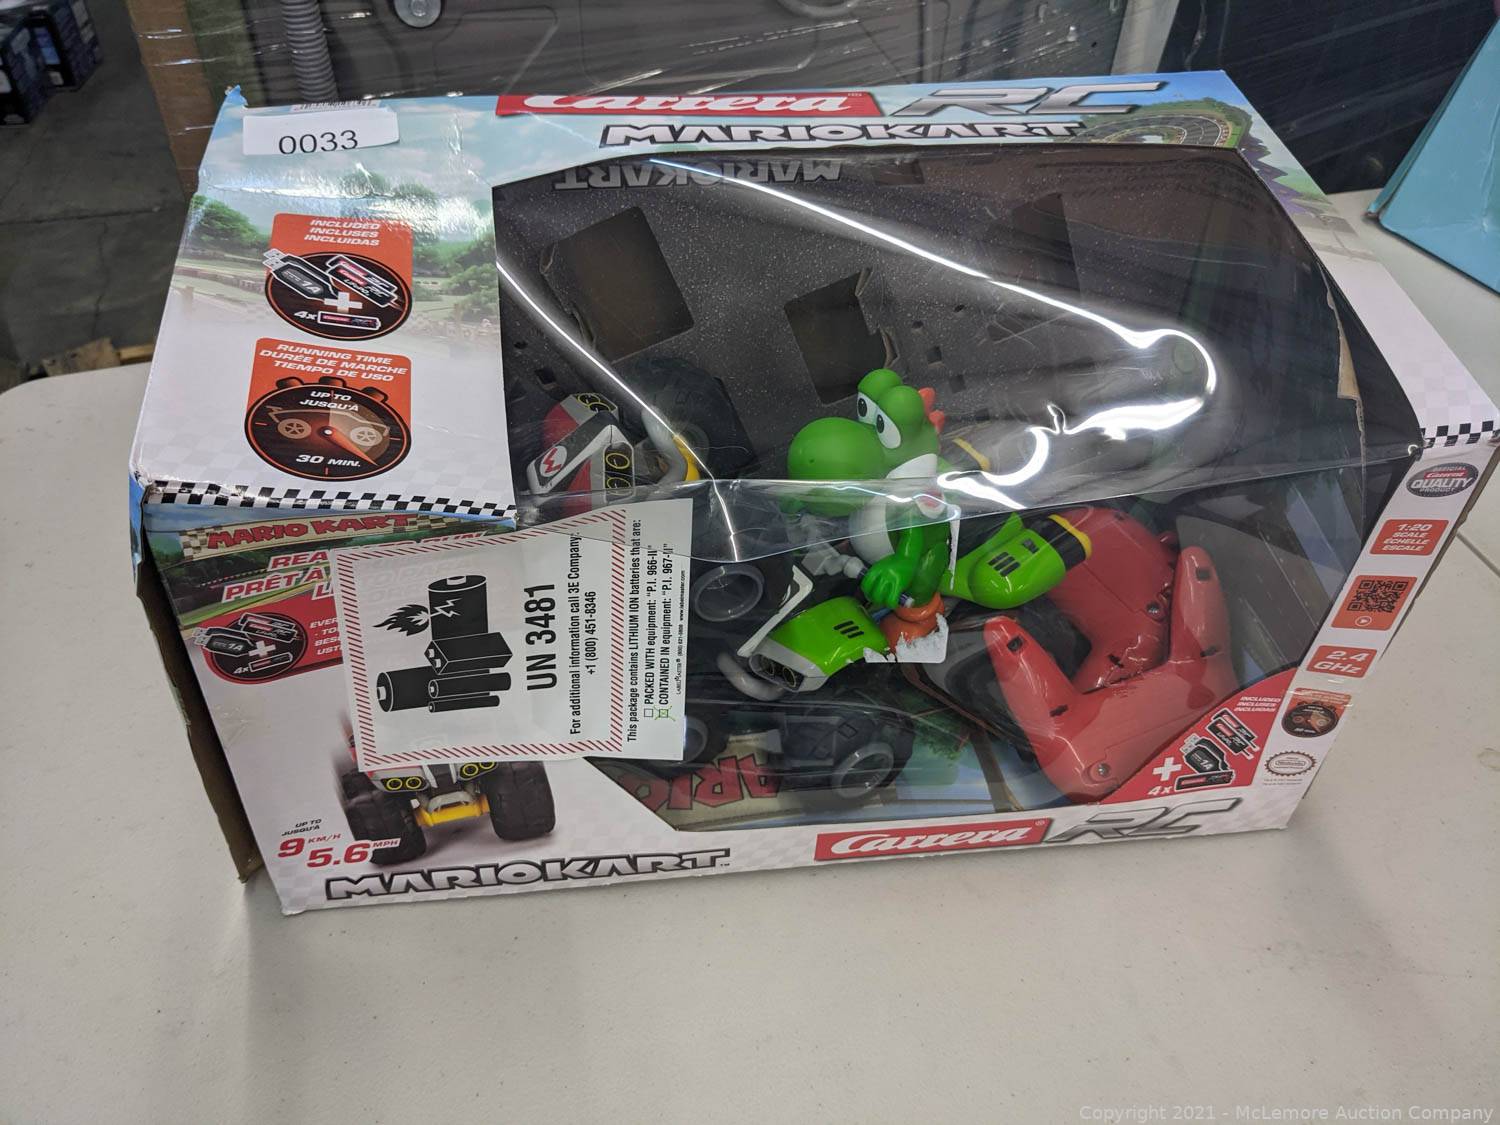 McLemore Auction Company - Auction: Toys and Last Minute Gifts for the  Holidays from the Large Warehouse Wholesale Club You Know and Love! ITEM: Carrera  RC Mario Kart Quad Twin Pack -